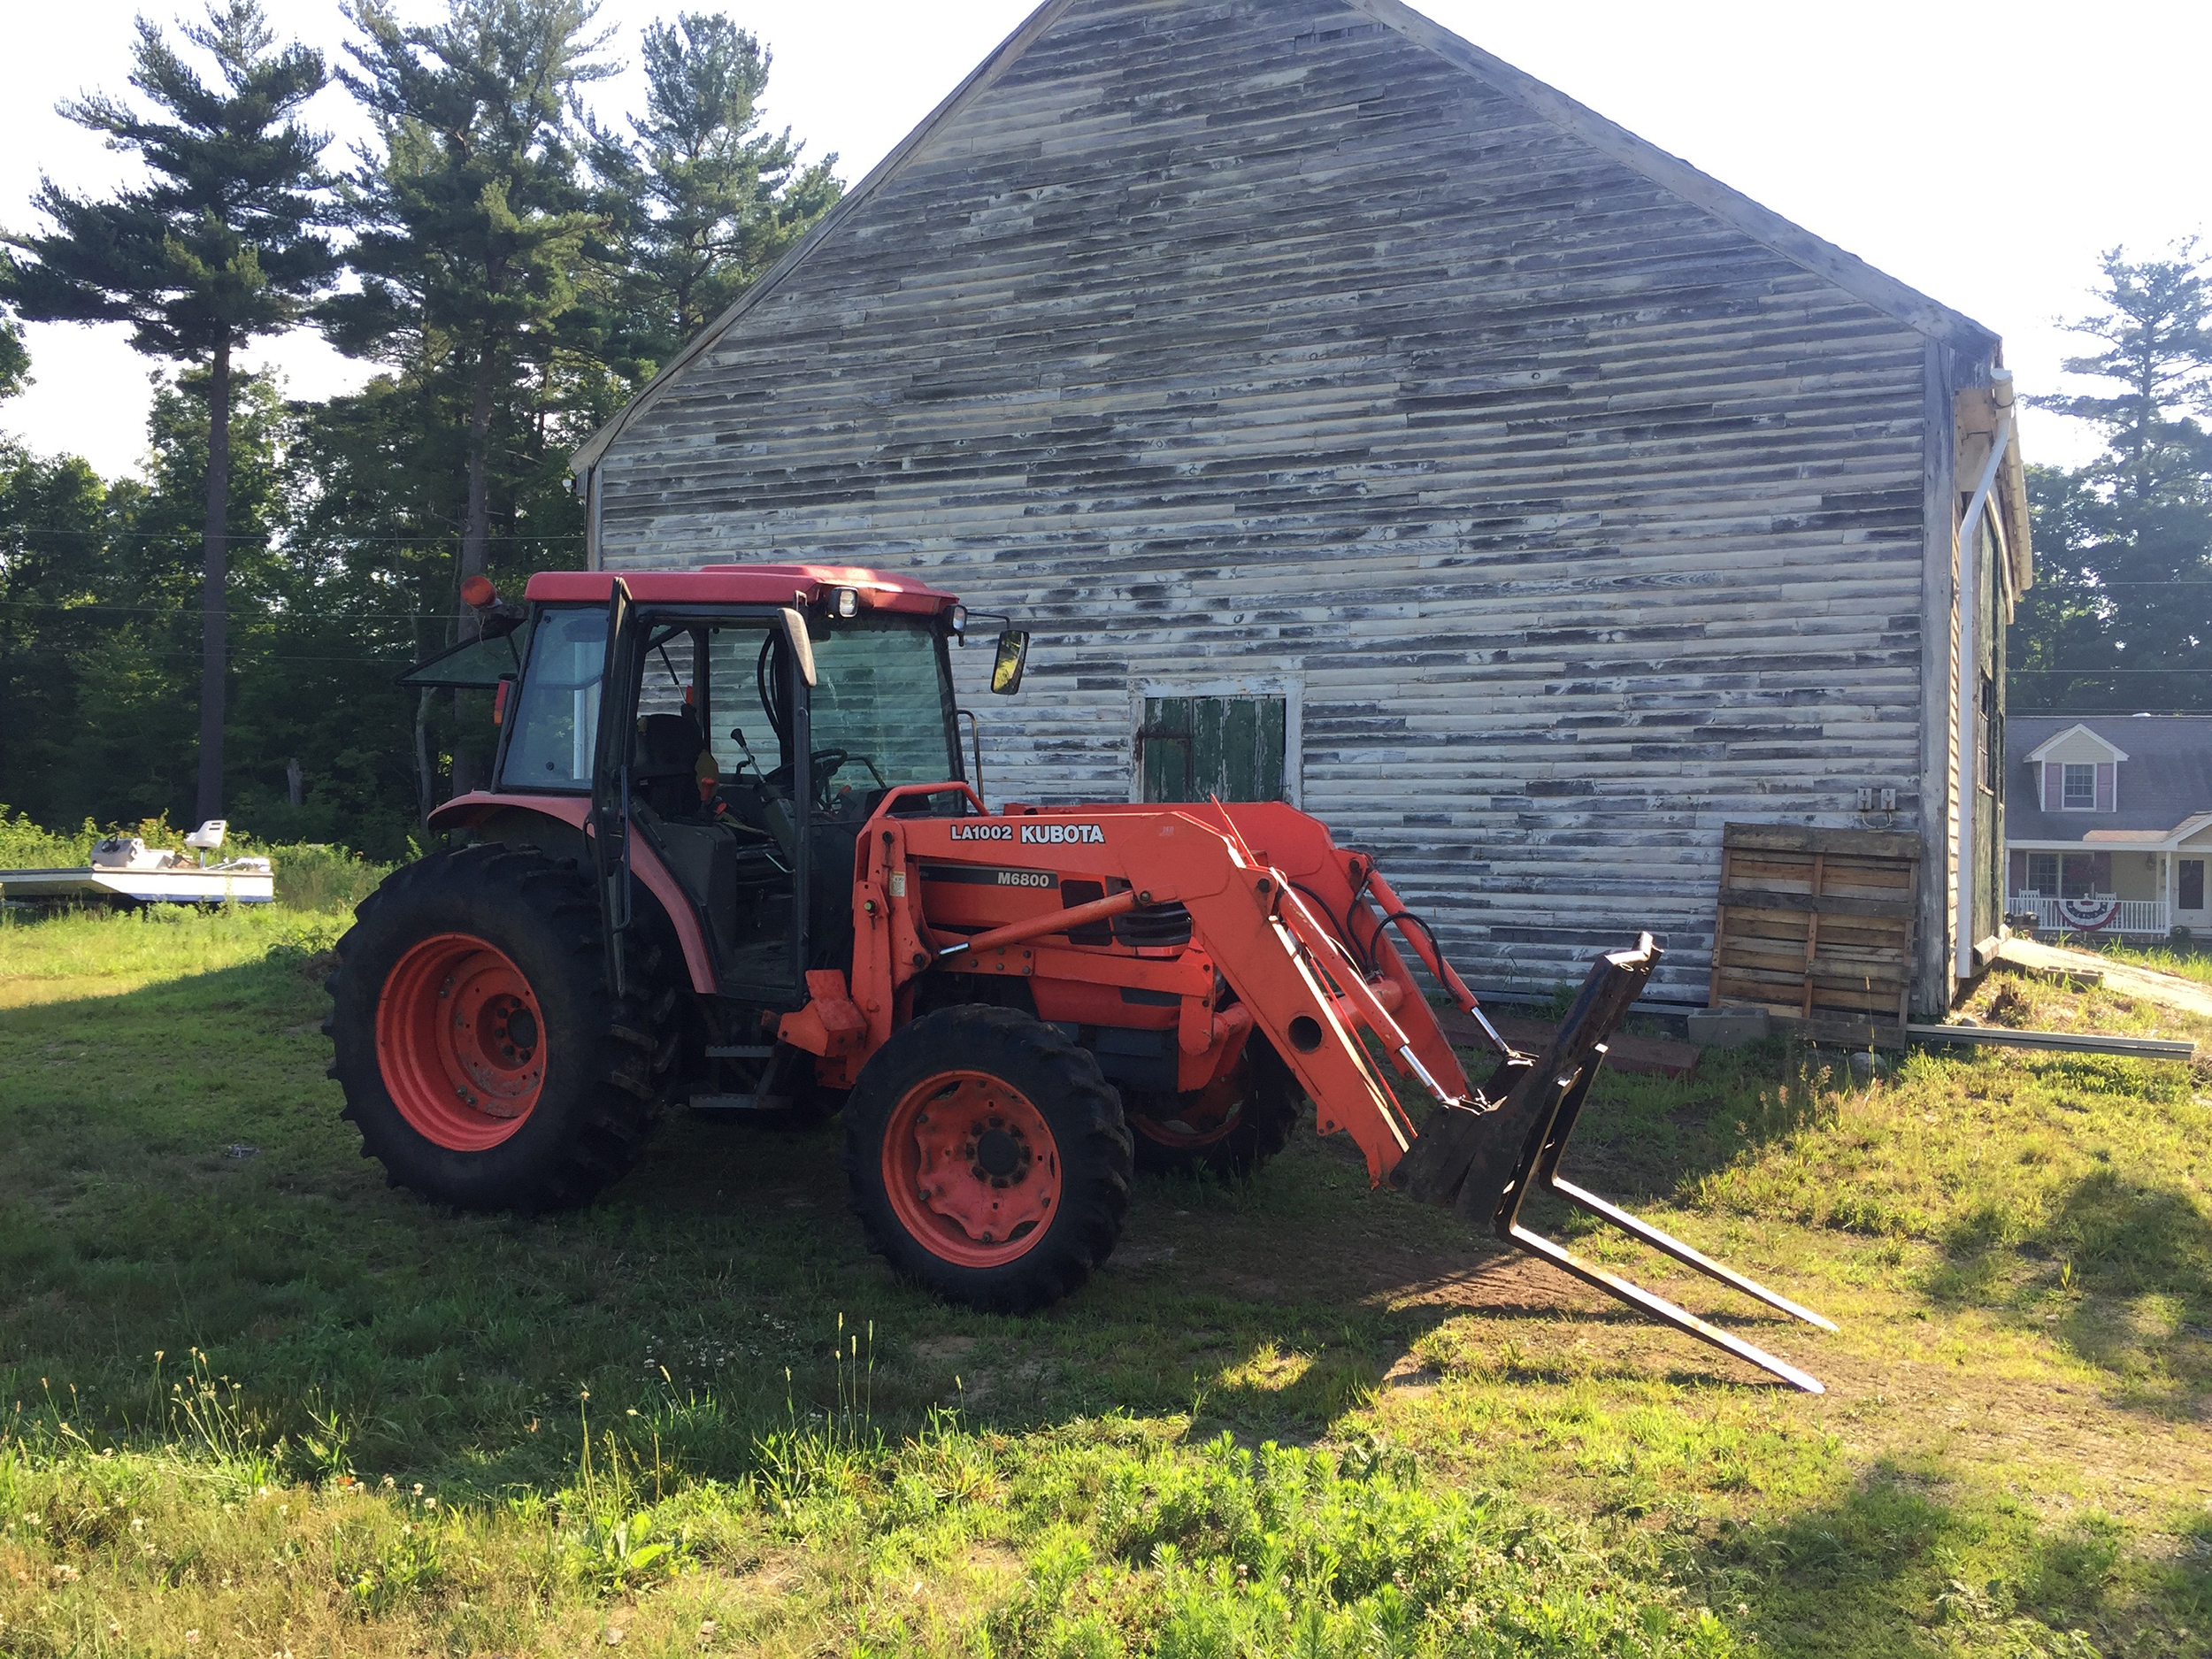 Our first tractor!